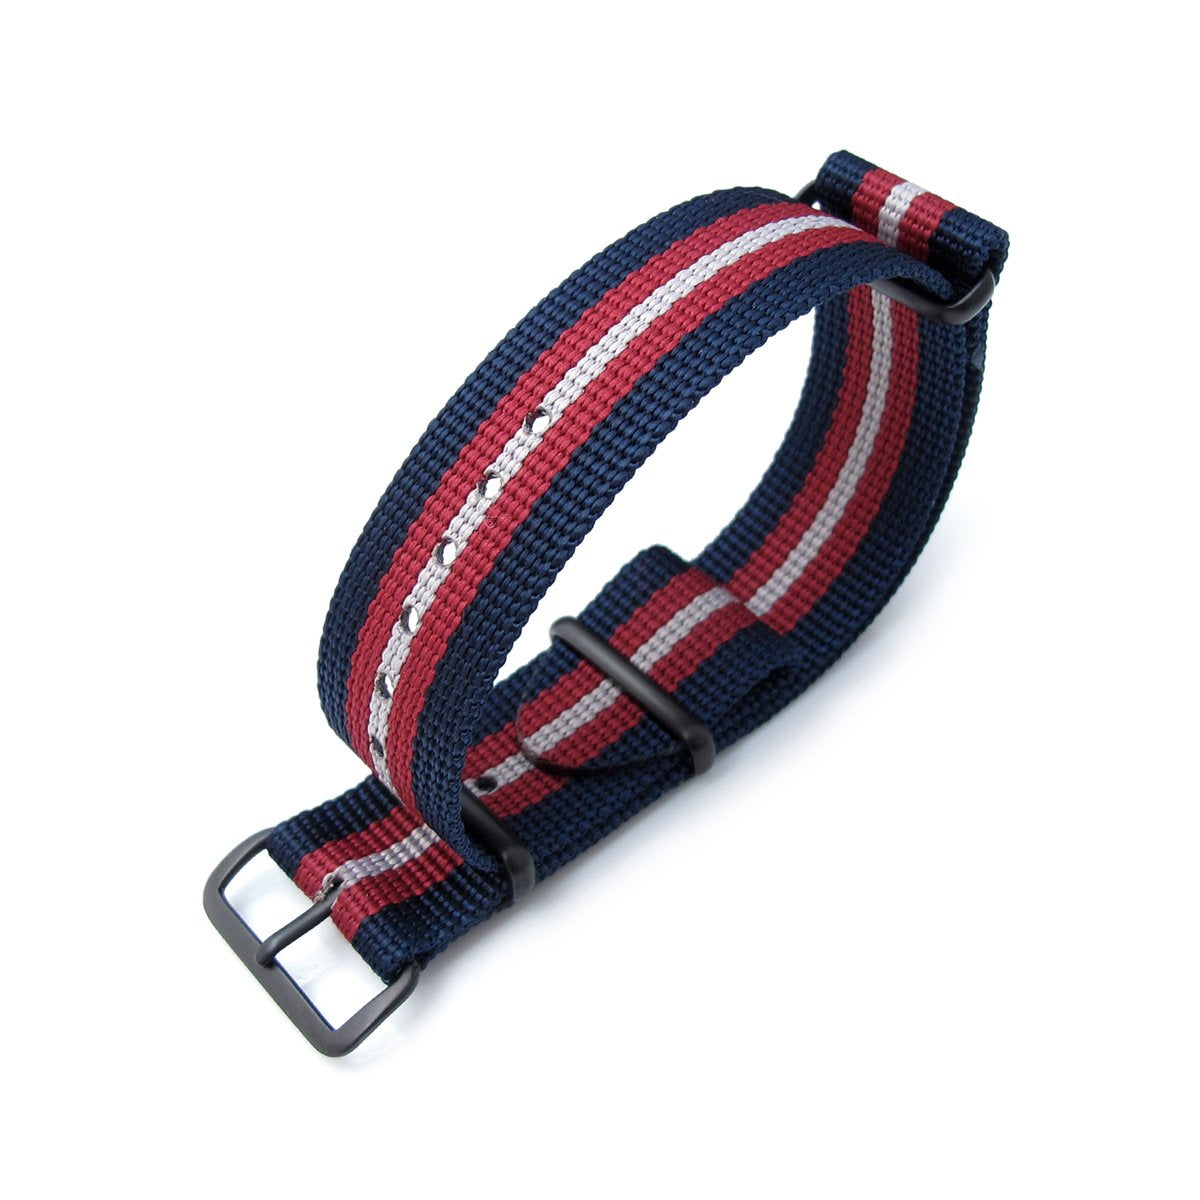 MiLTAT 20mm 21mm or 22mm G10 NATO Bullet Tail Watch Strap Ballistic Nylon PVD Blue Red &amp; Grey Stripes Strapcode Watch Bands